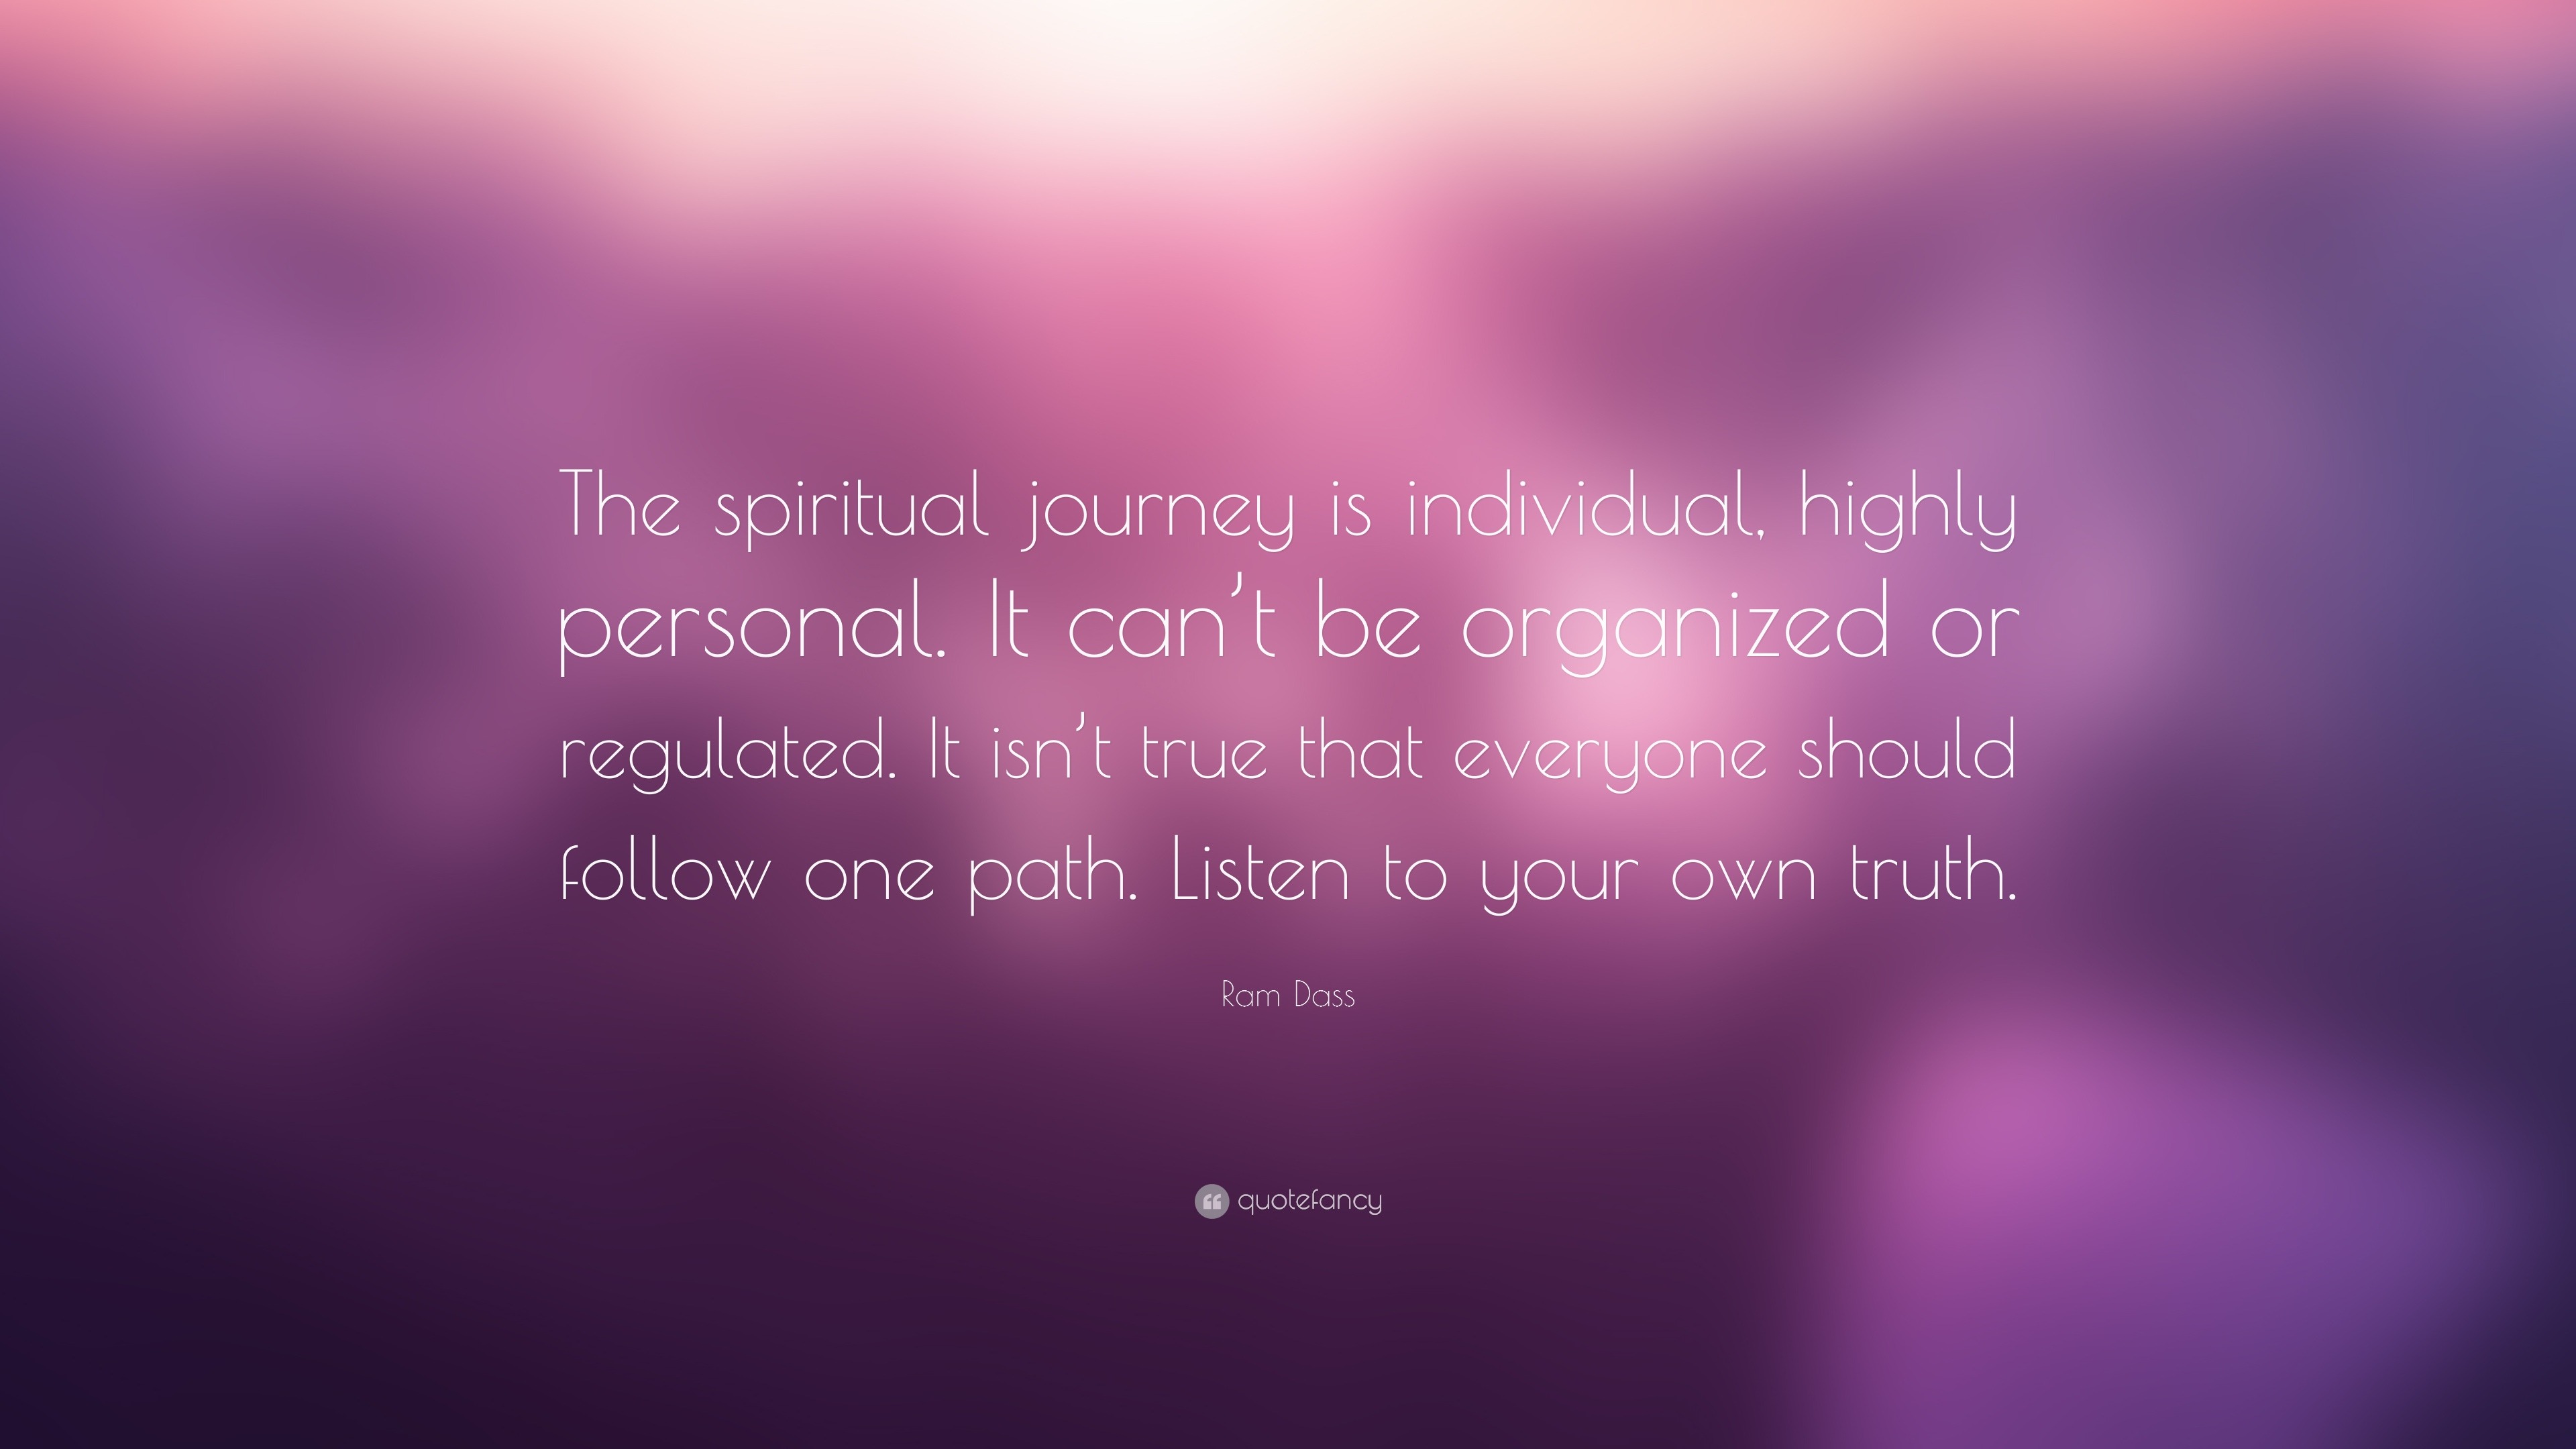 52199 Ram Dass Quote The spiritual journey is individual highly personal